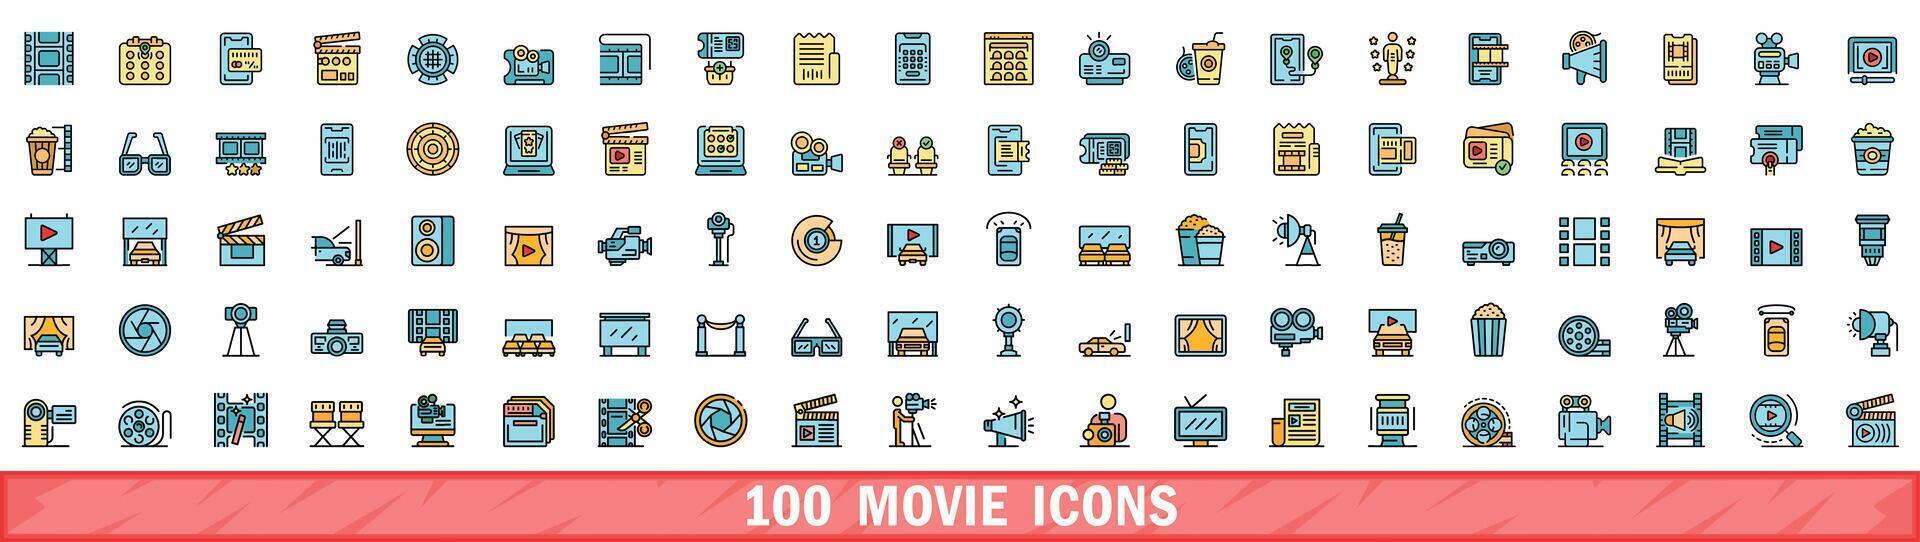 100 movie icons set, color line style vector